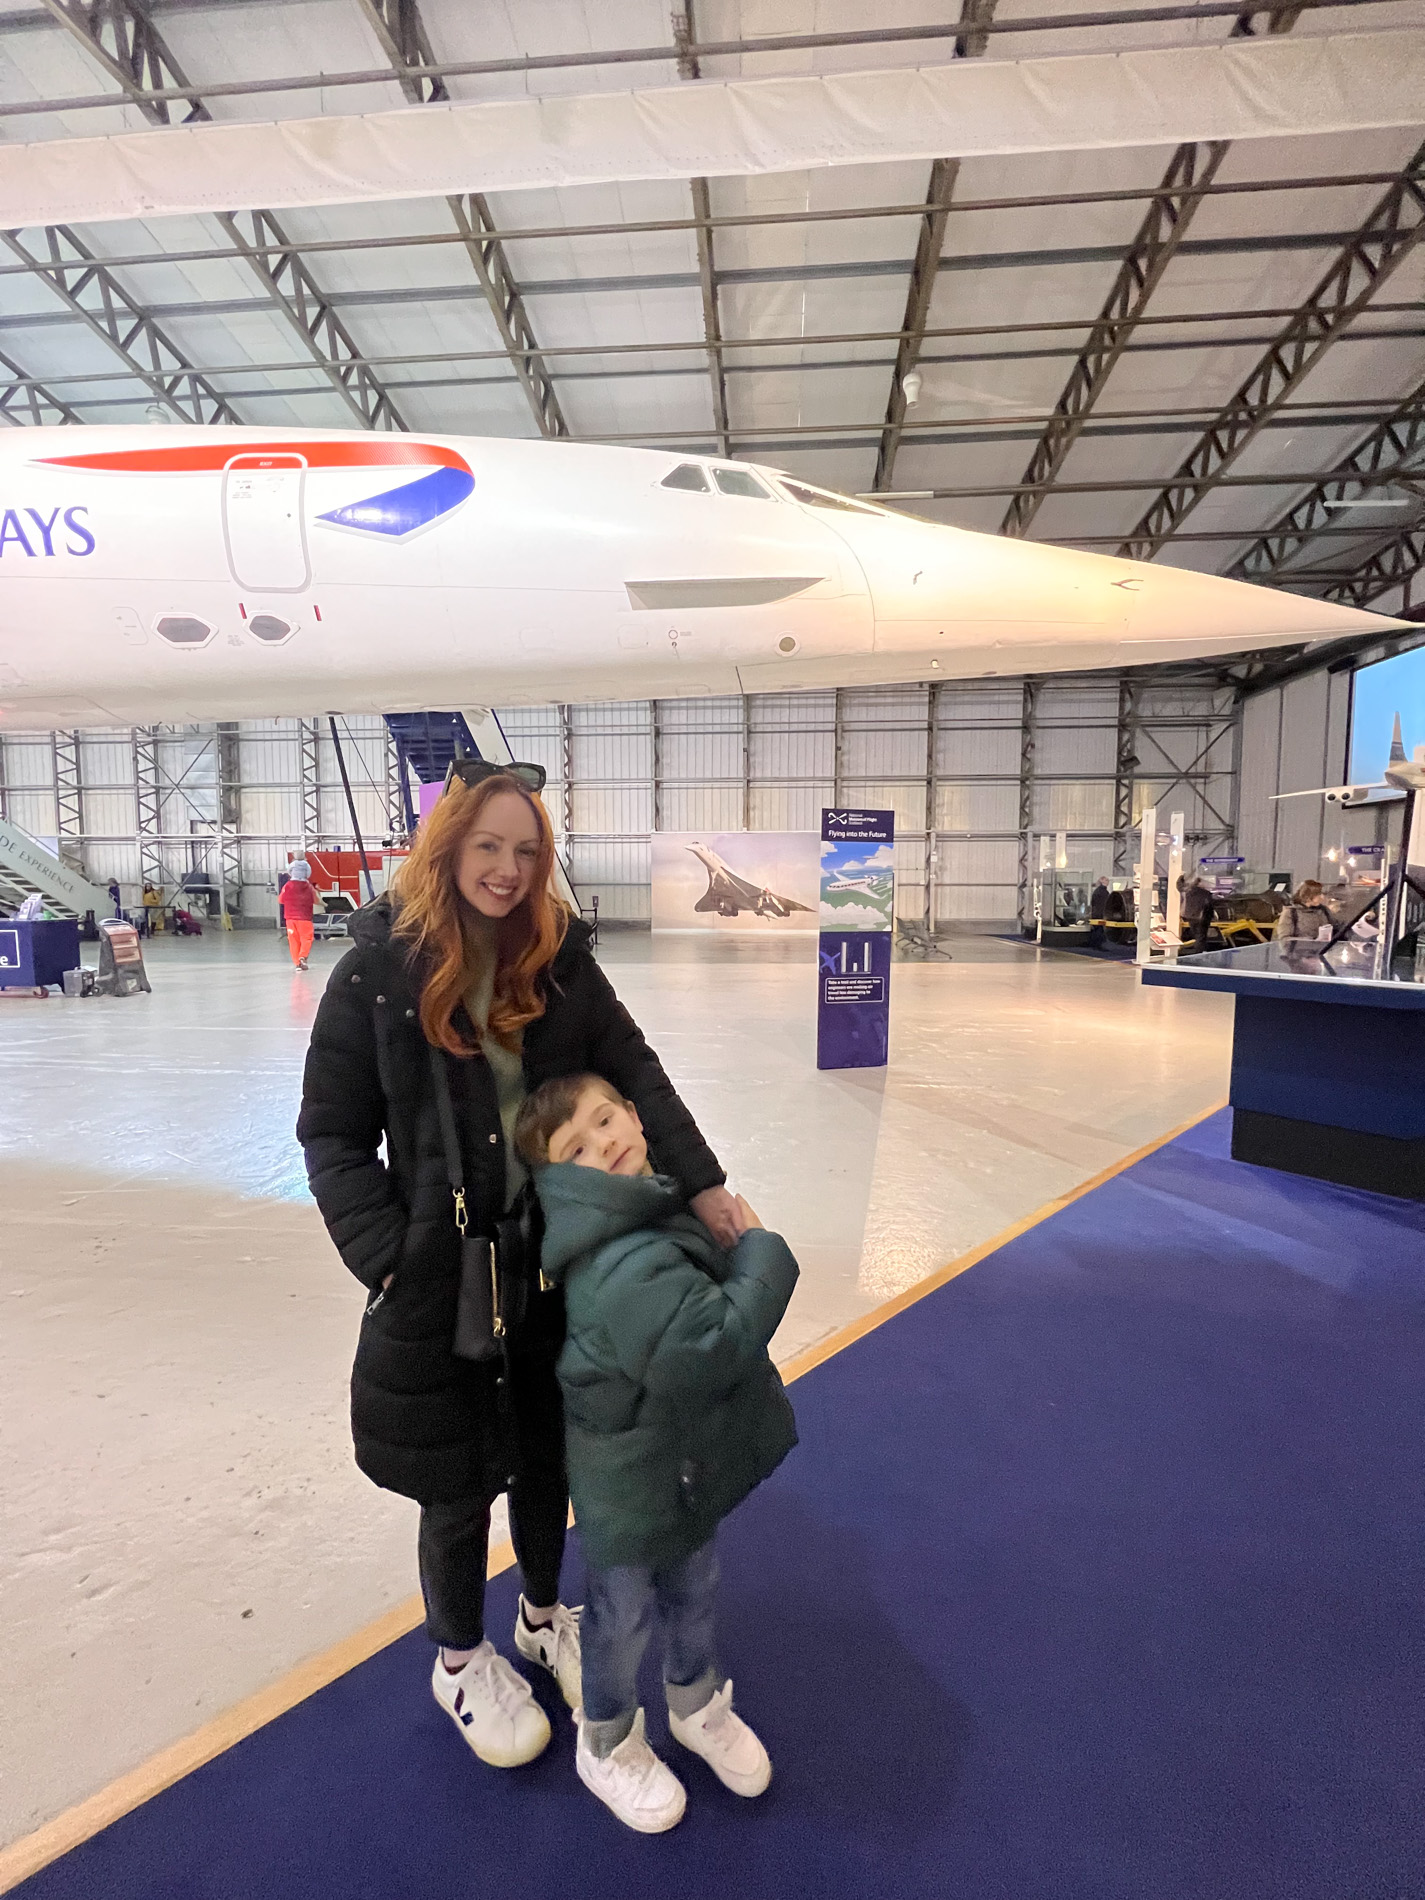 Me and Max in front of Concorde